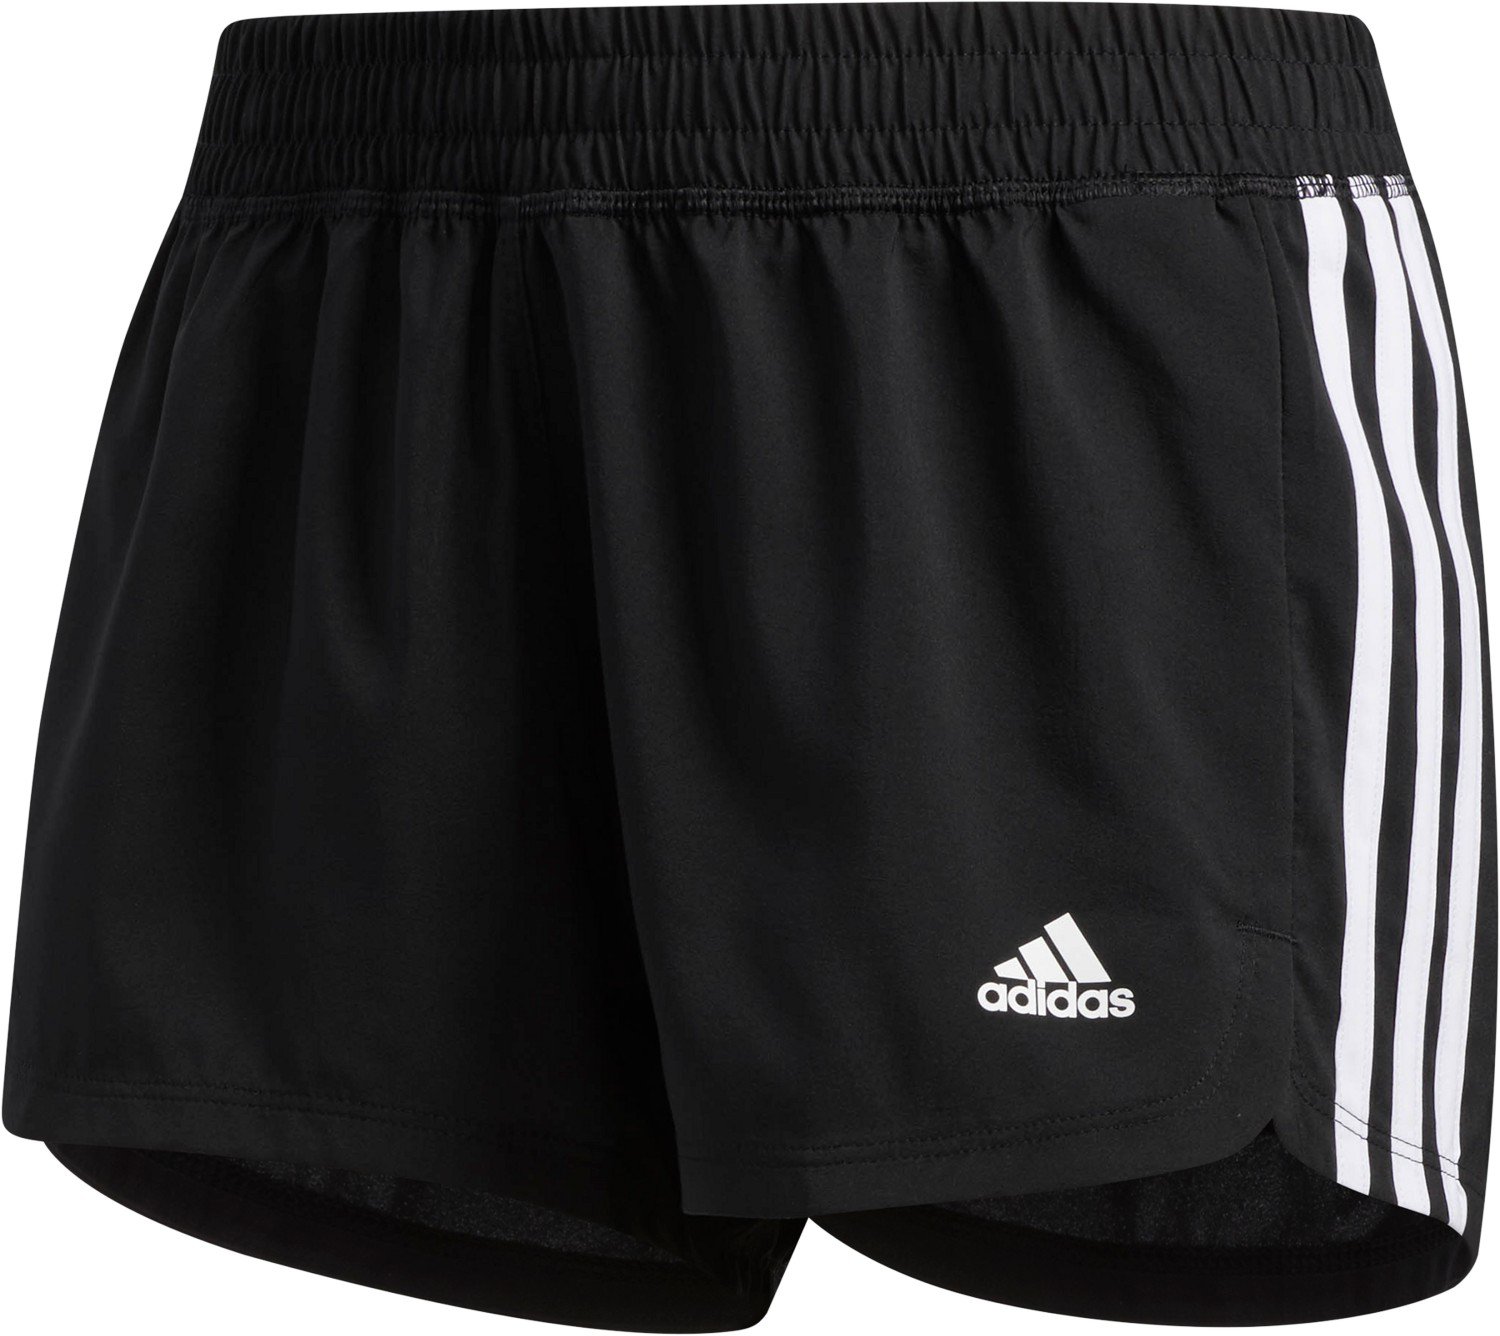 adidas Women's 3-Stripes Pacers Woven Shorts | Academy